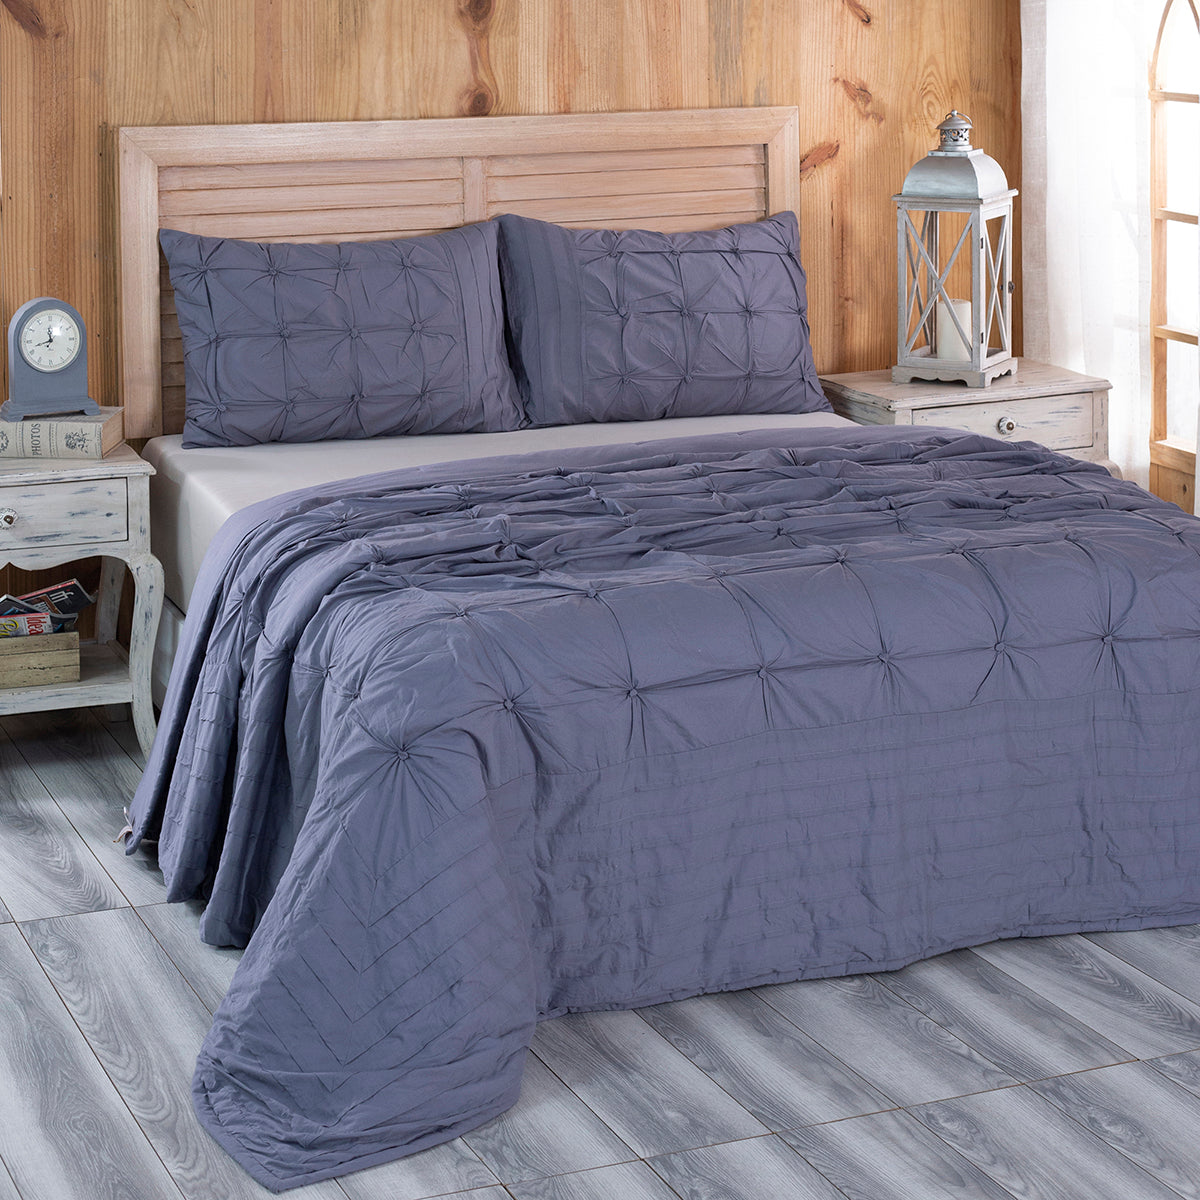 Rurban Divine Distressed Corners Summer AC Quilt/Quilted Bed Cover/Comforter Grey